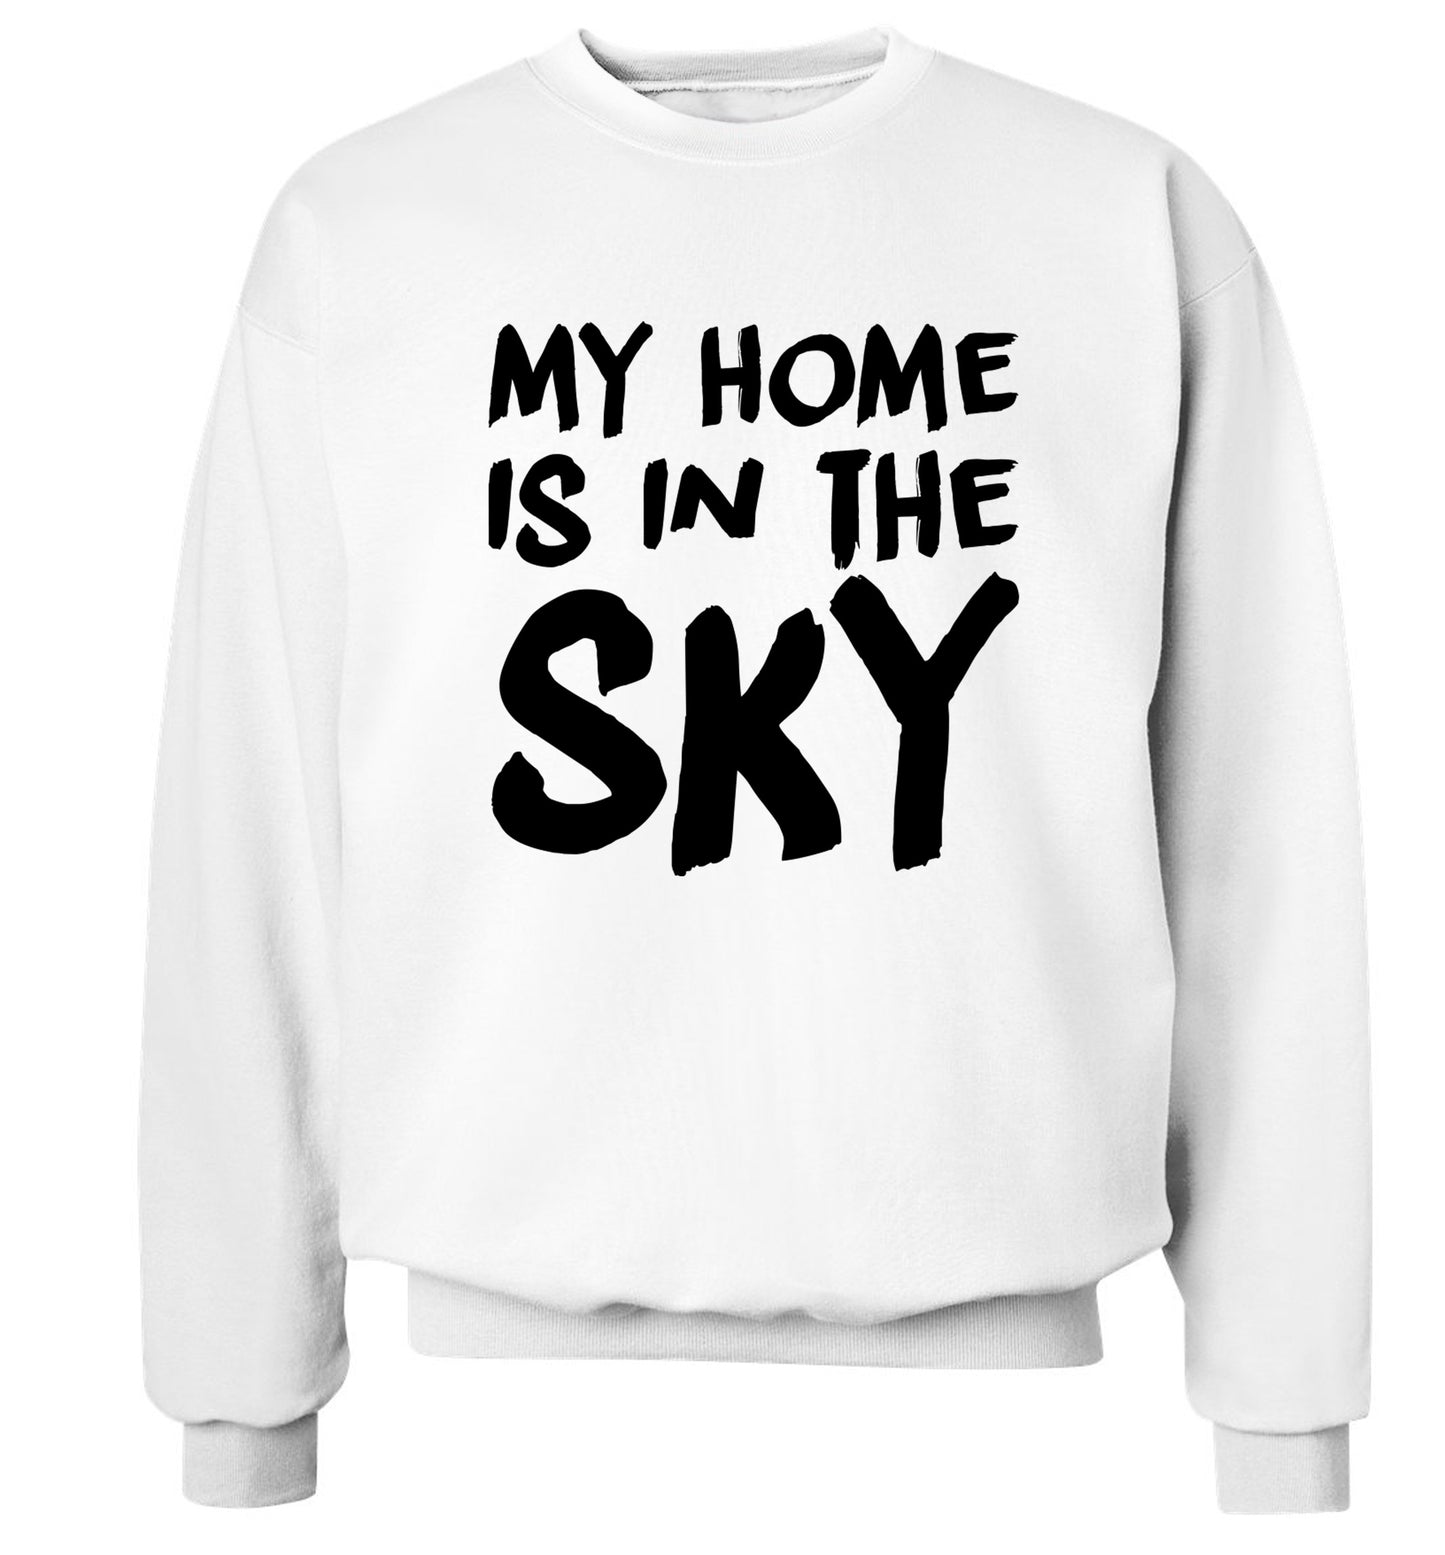 My home is in the sky Adult's unisex white Sweater 2XL